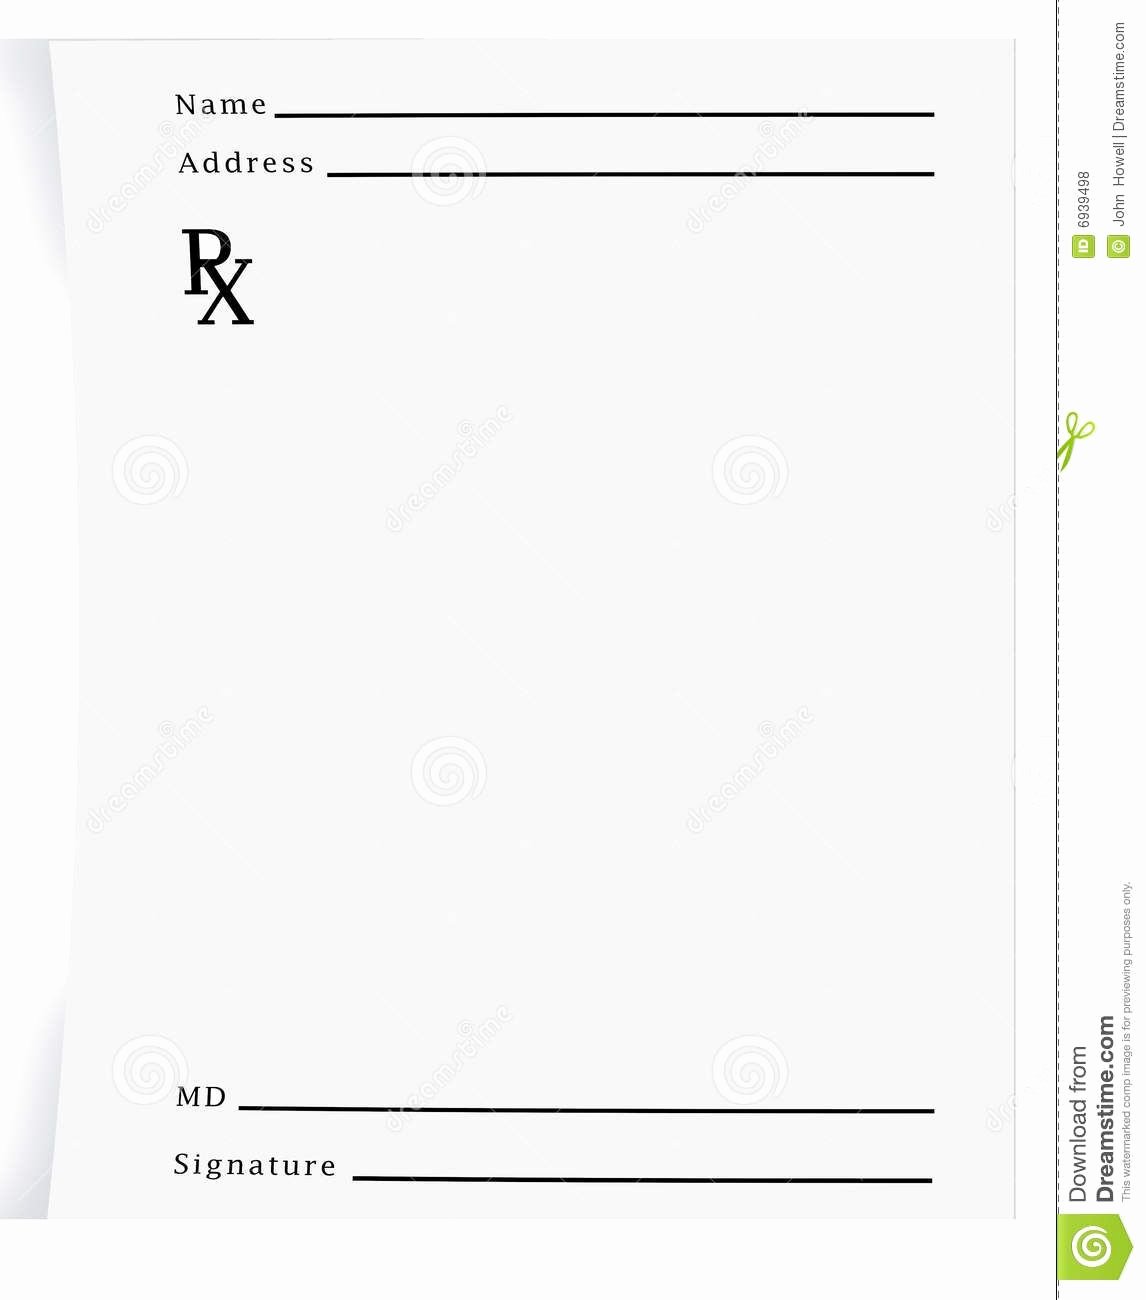 Prescription Label Template Microsoft Word New Prescription Pad Blank Download From Over 27 Million High Quality Stock S